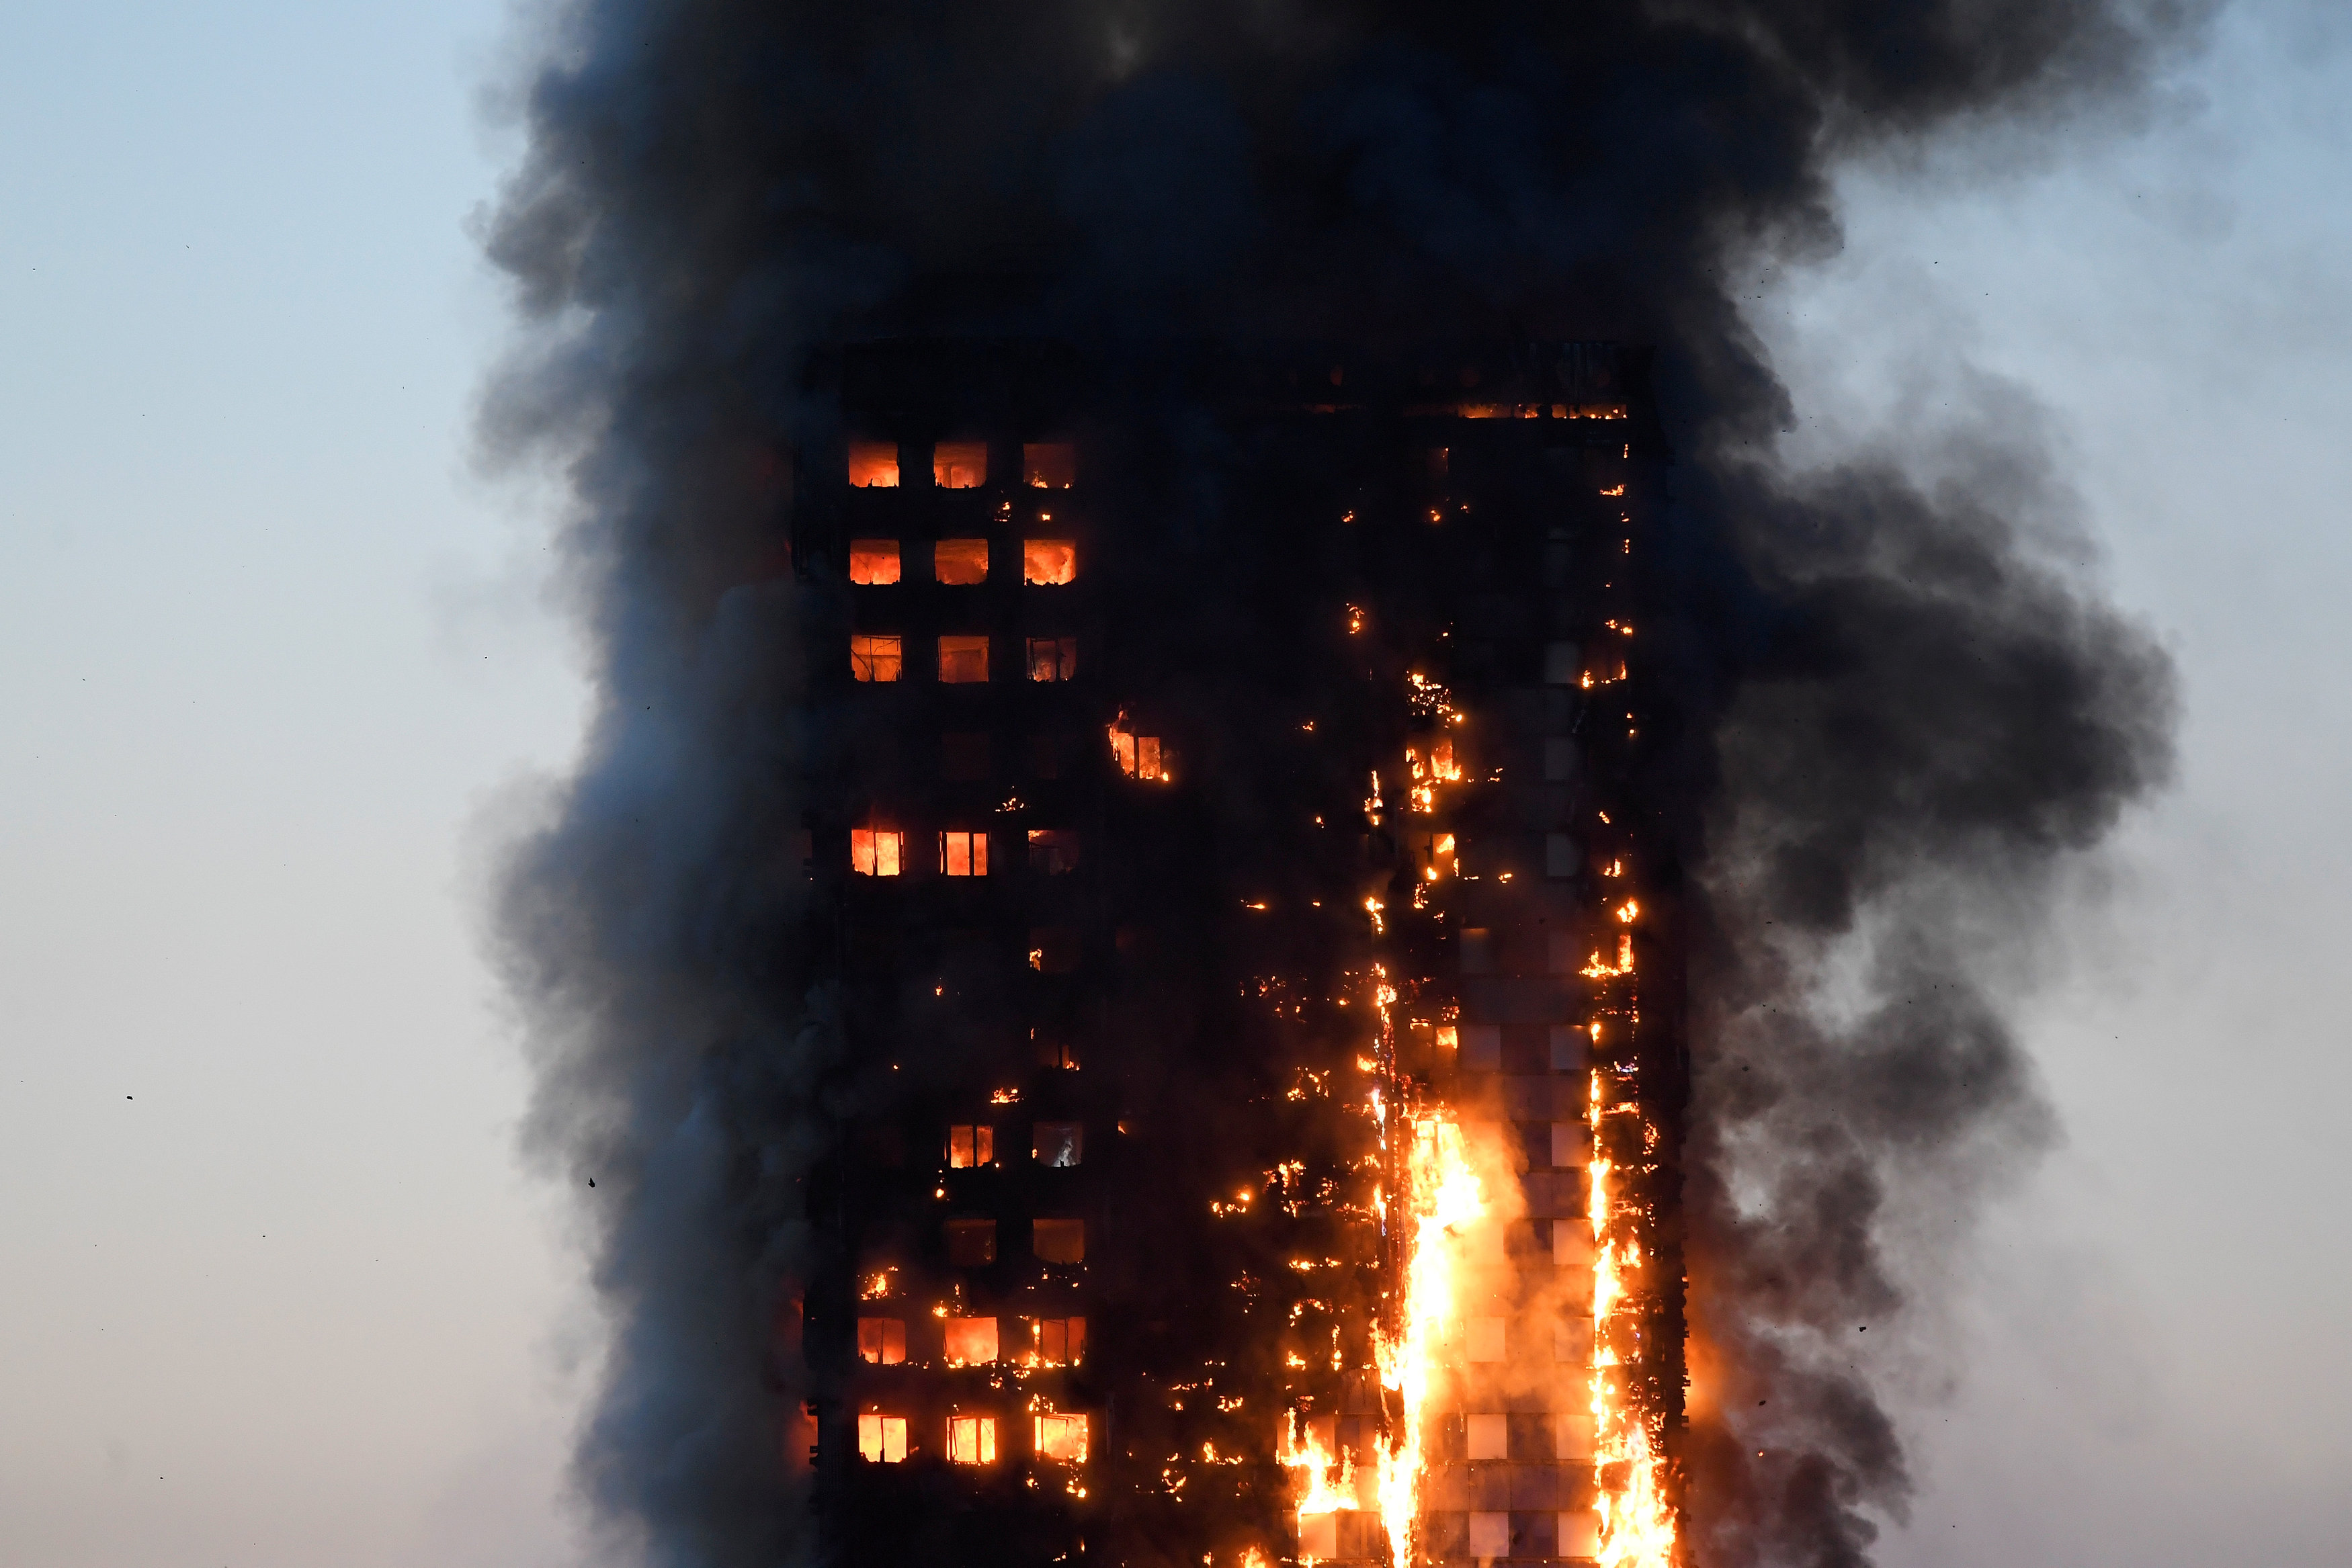 In pictures: Huge fire engulfs London tower block